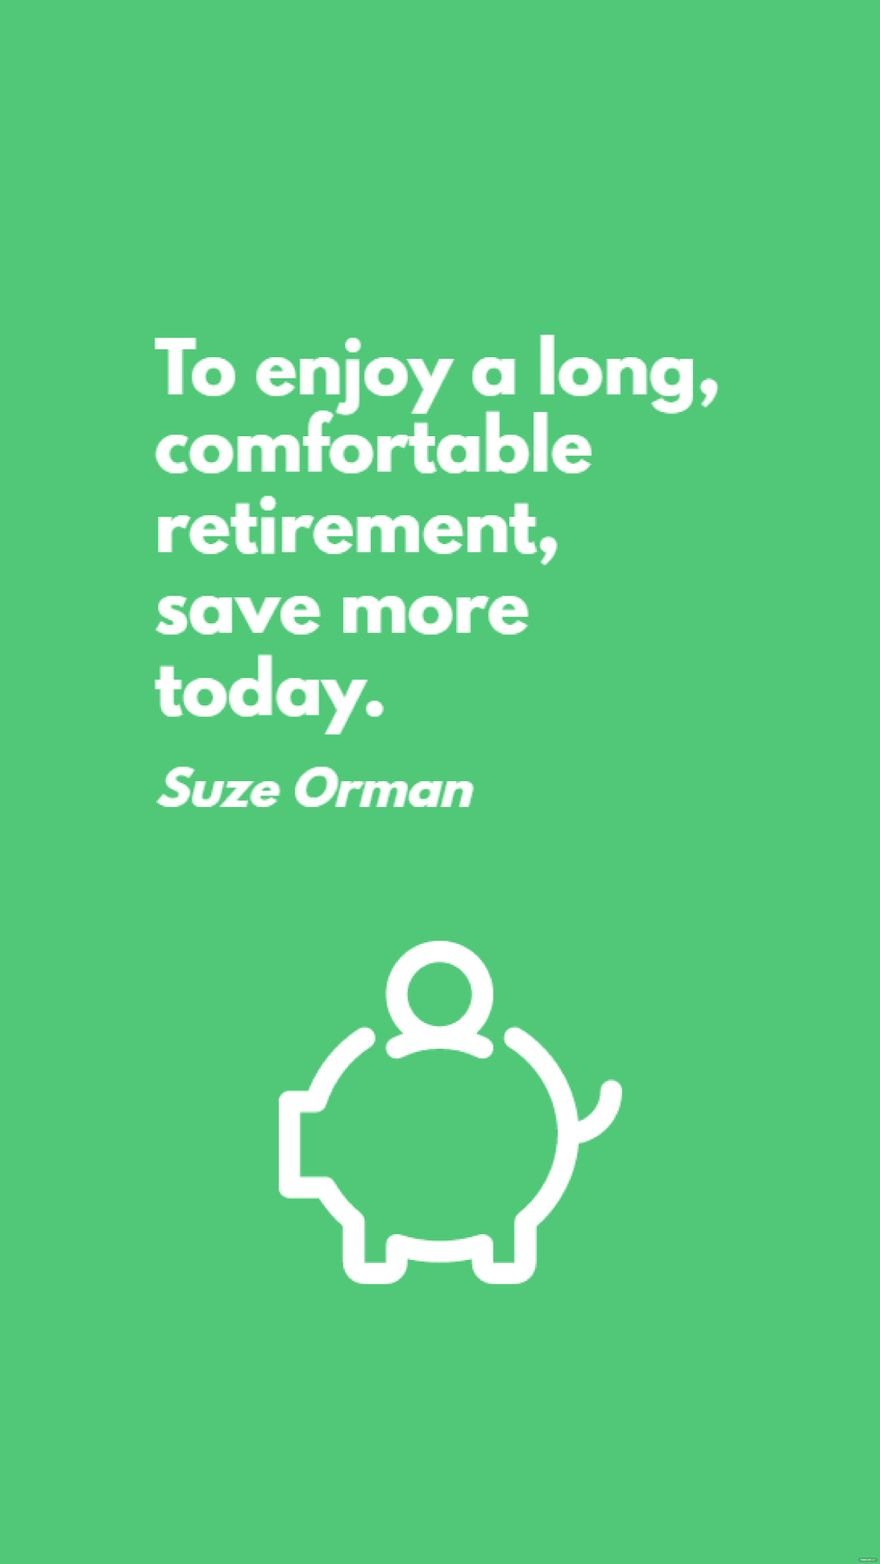 Free Suze Orman - To enjoy a long, comfortable retirement, save more today. in JPG